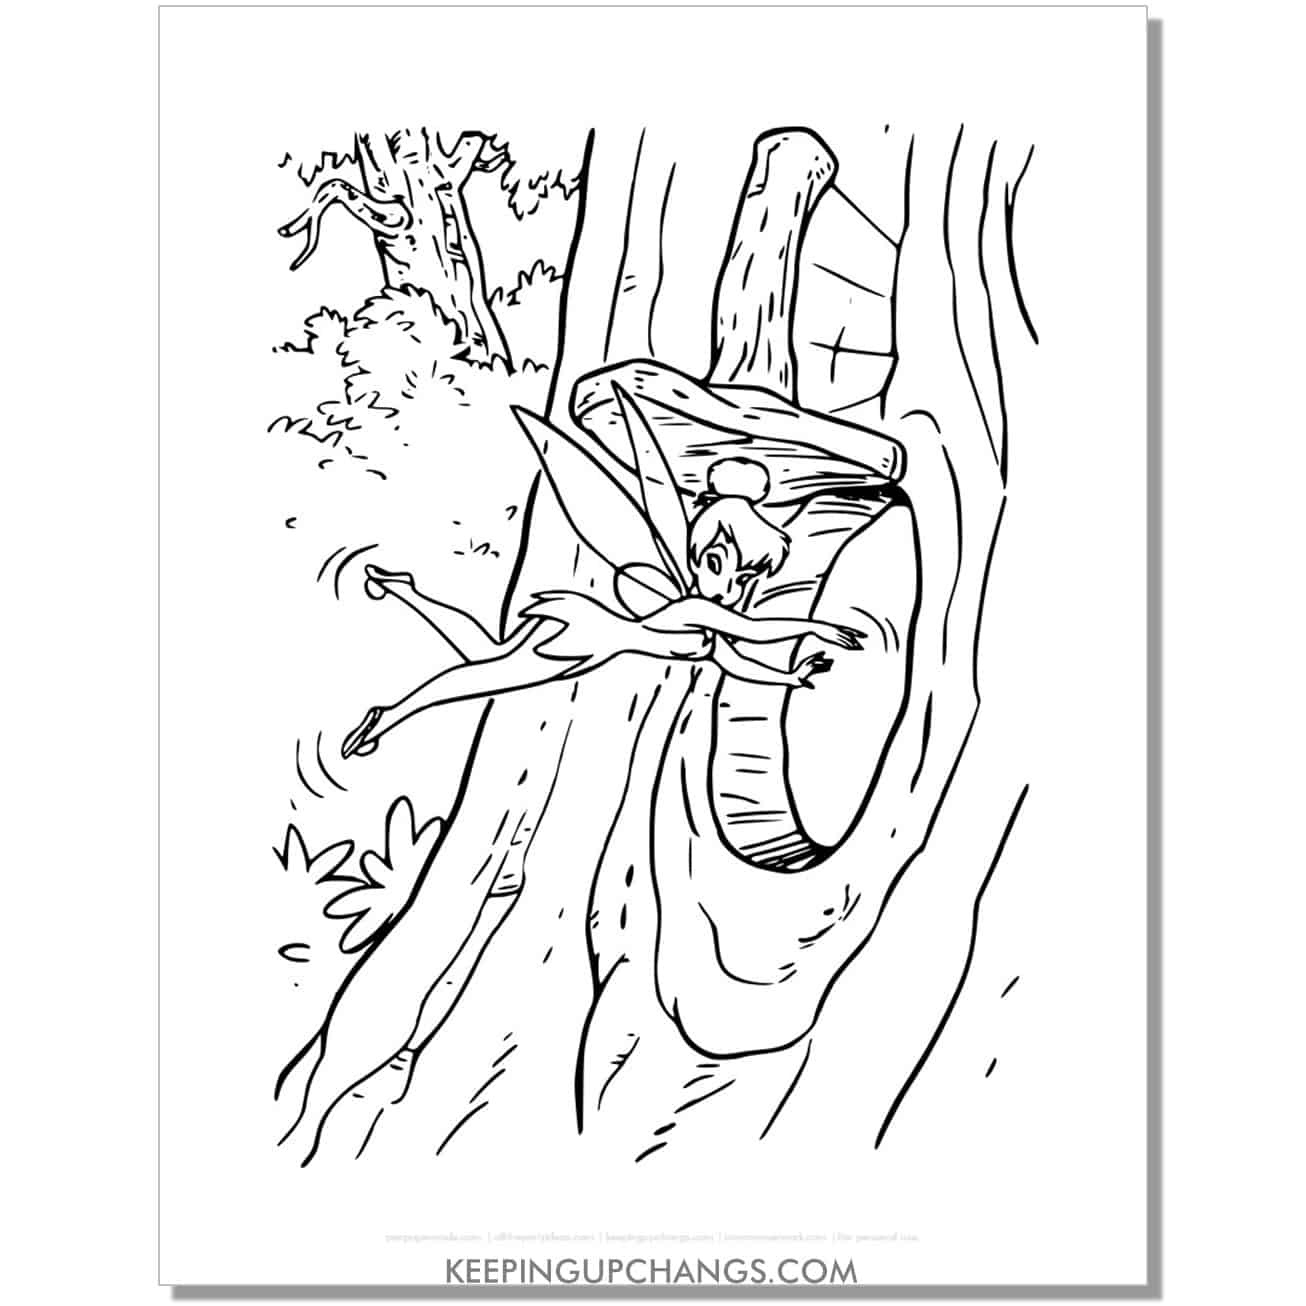 tinkerbell flies into home in tree coloring page, sheet.